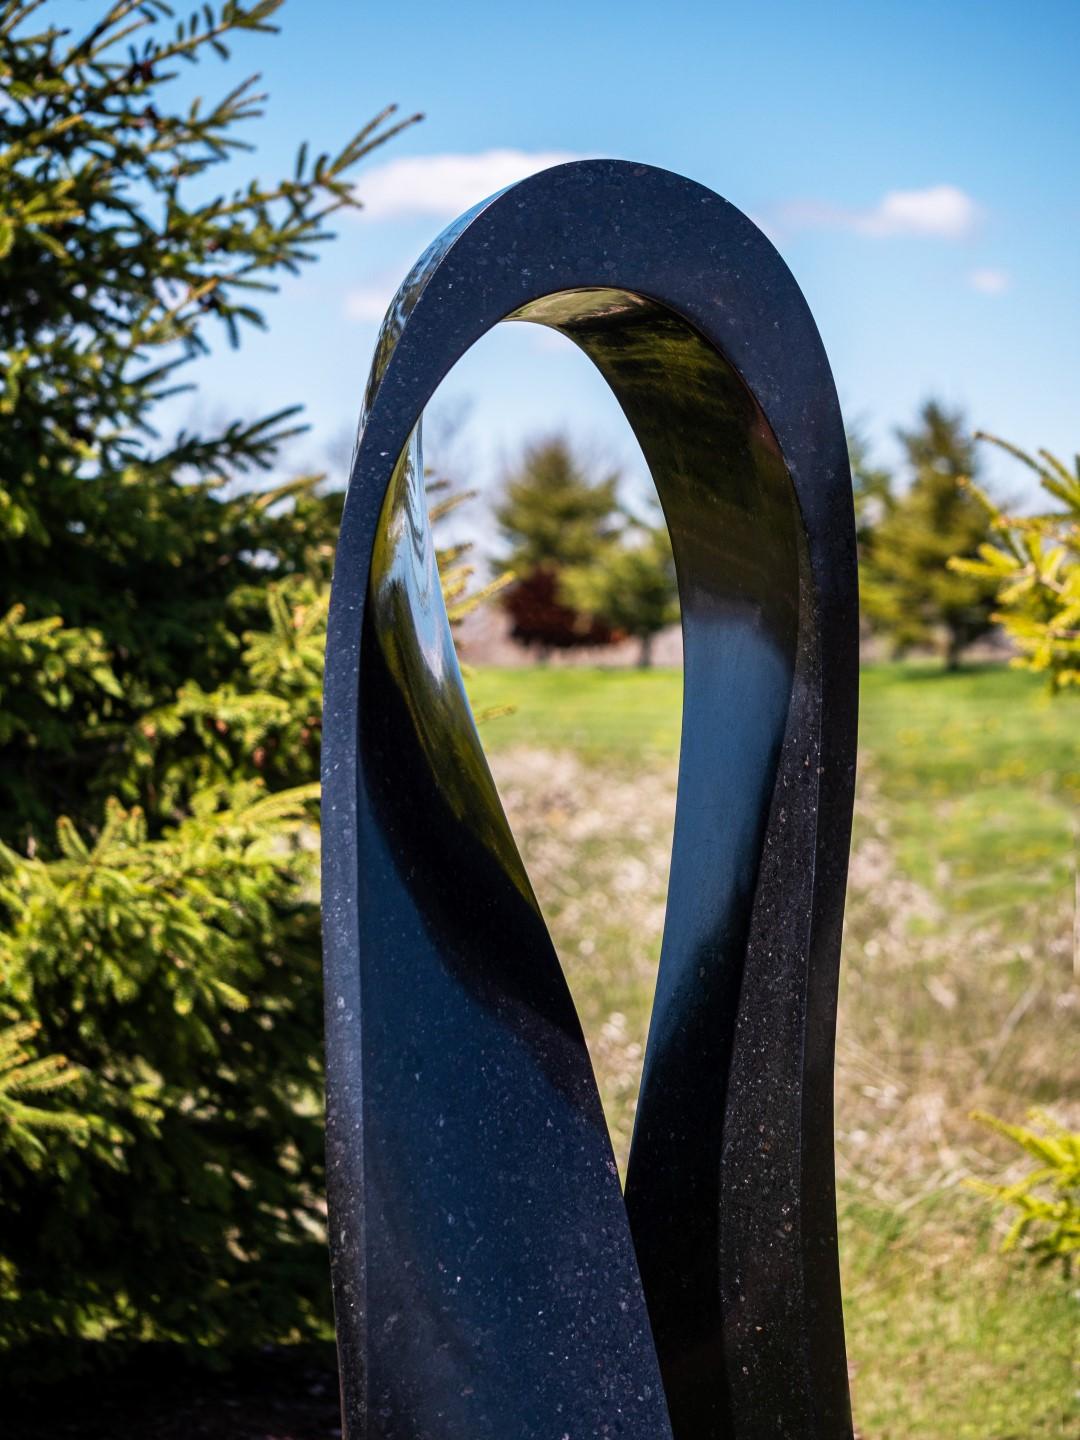 Smooth black granite has been engineered by Canadian artist Jeremy Guy into an elegant outdoor sculpture in the form of a mobius strip. 

Discovered by the German mathematician August Ferdinand Möbius, a Möbius strip is a surface with only one side